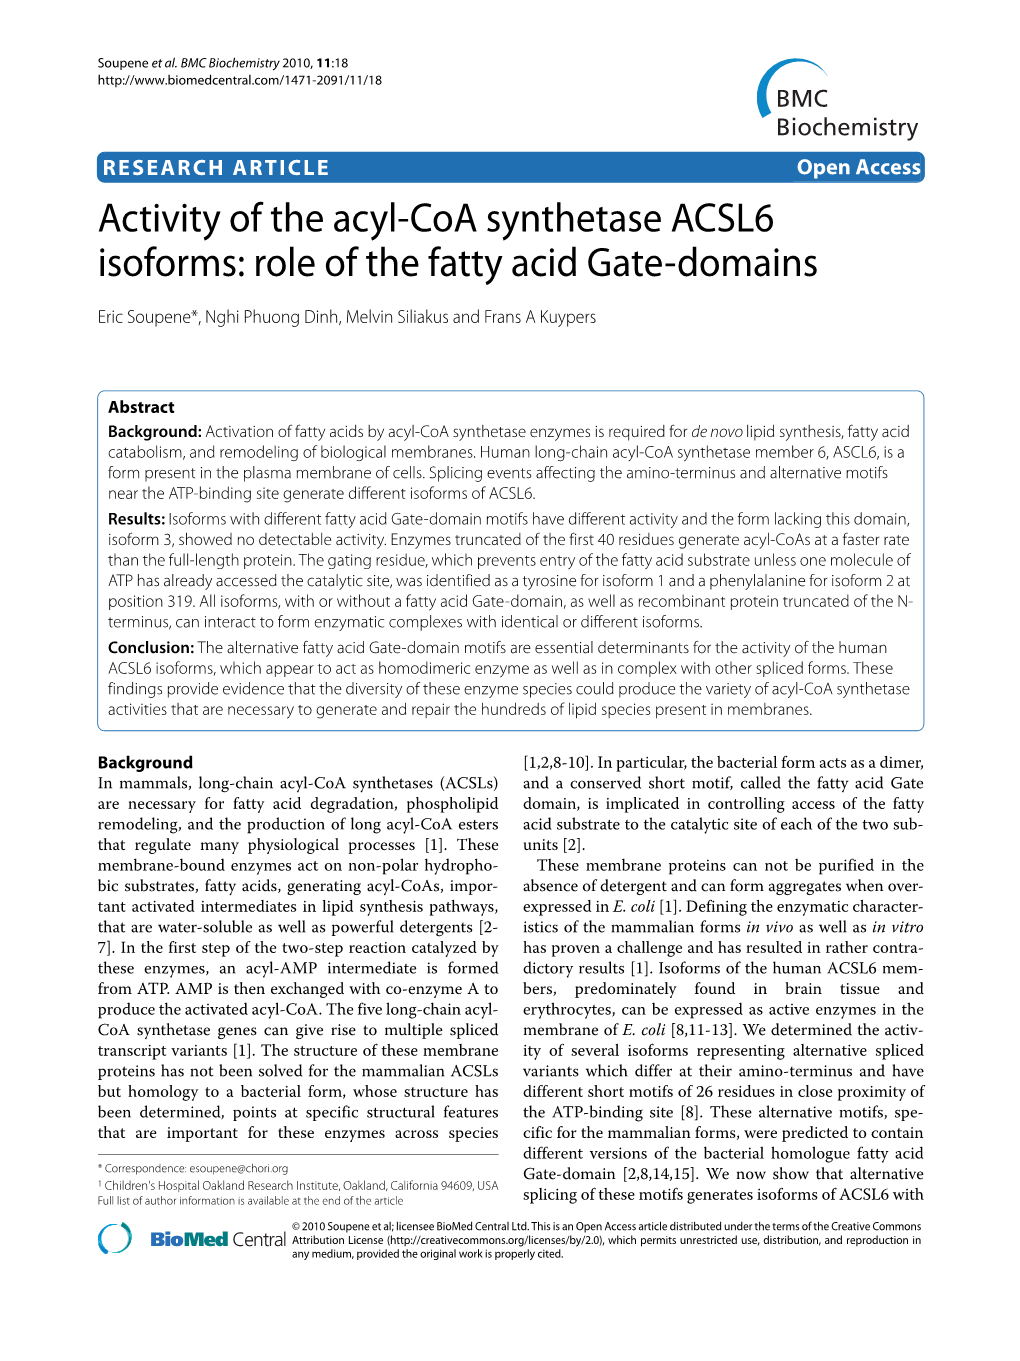 Activity of the Acyl-Coa Synthetase ACSL6 Isoforms: Role of the Fatty Acid Gate-Domains BMC Biochemistry 2010, 11:18